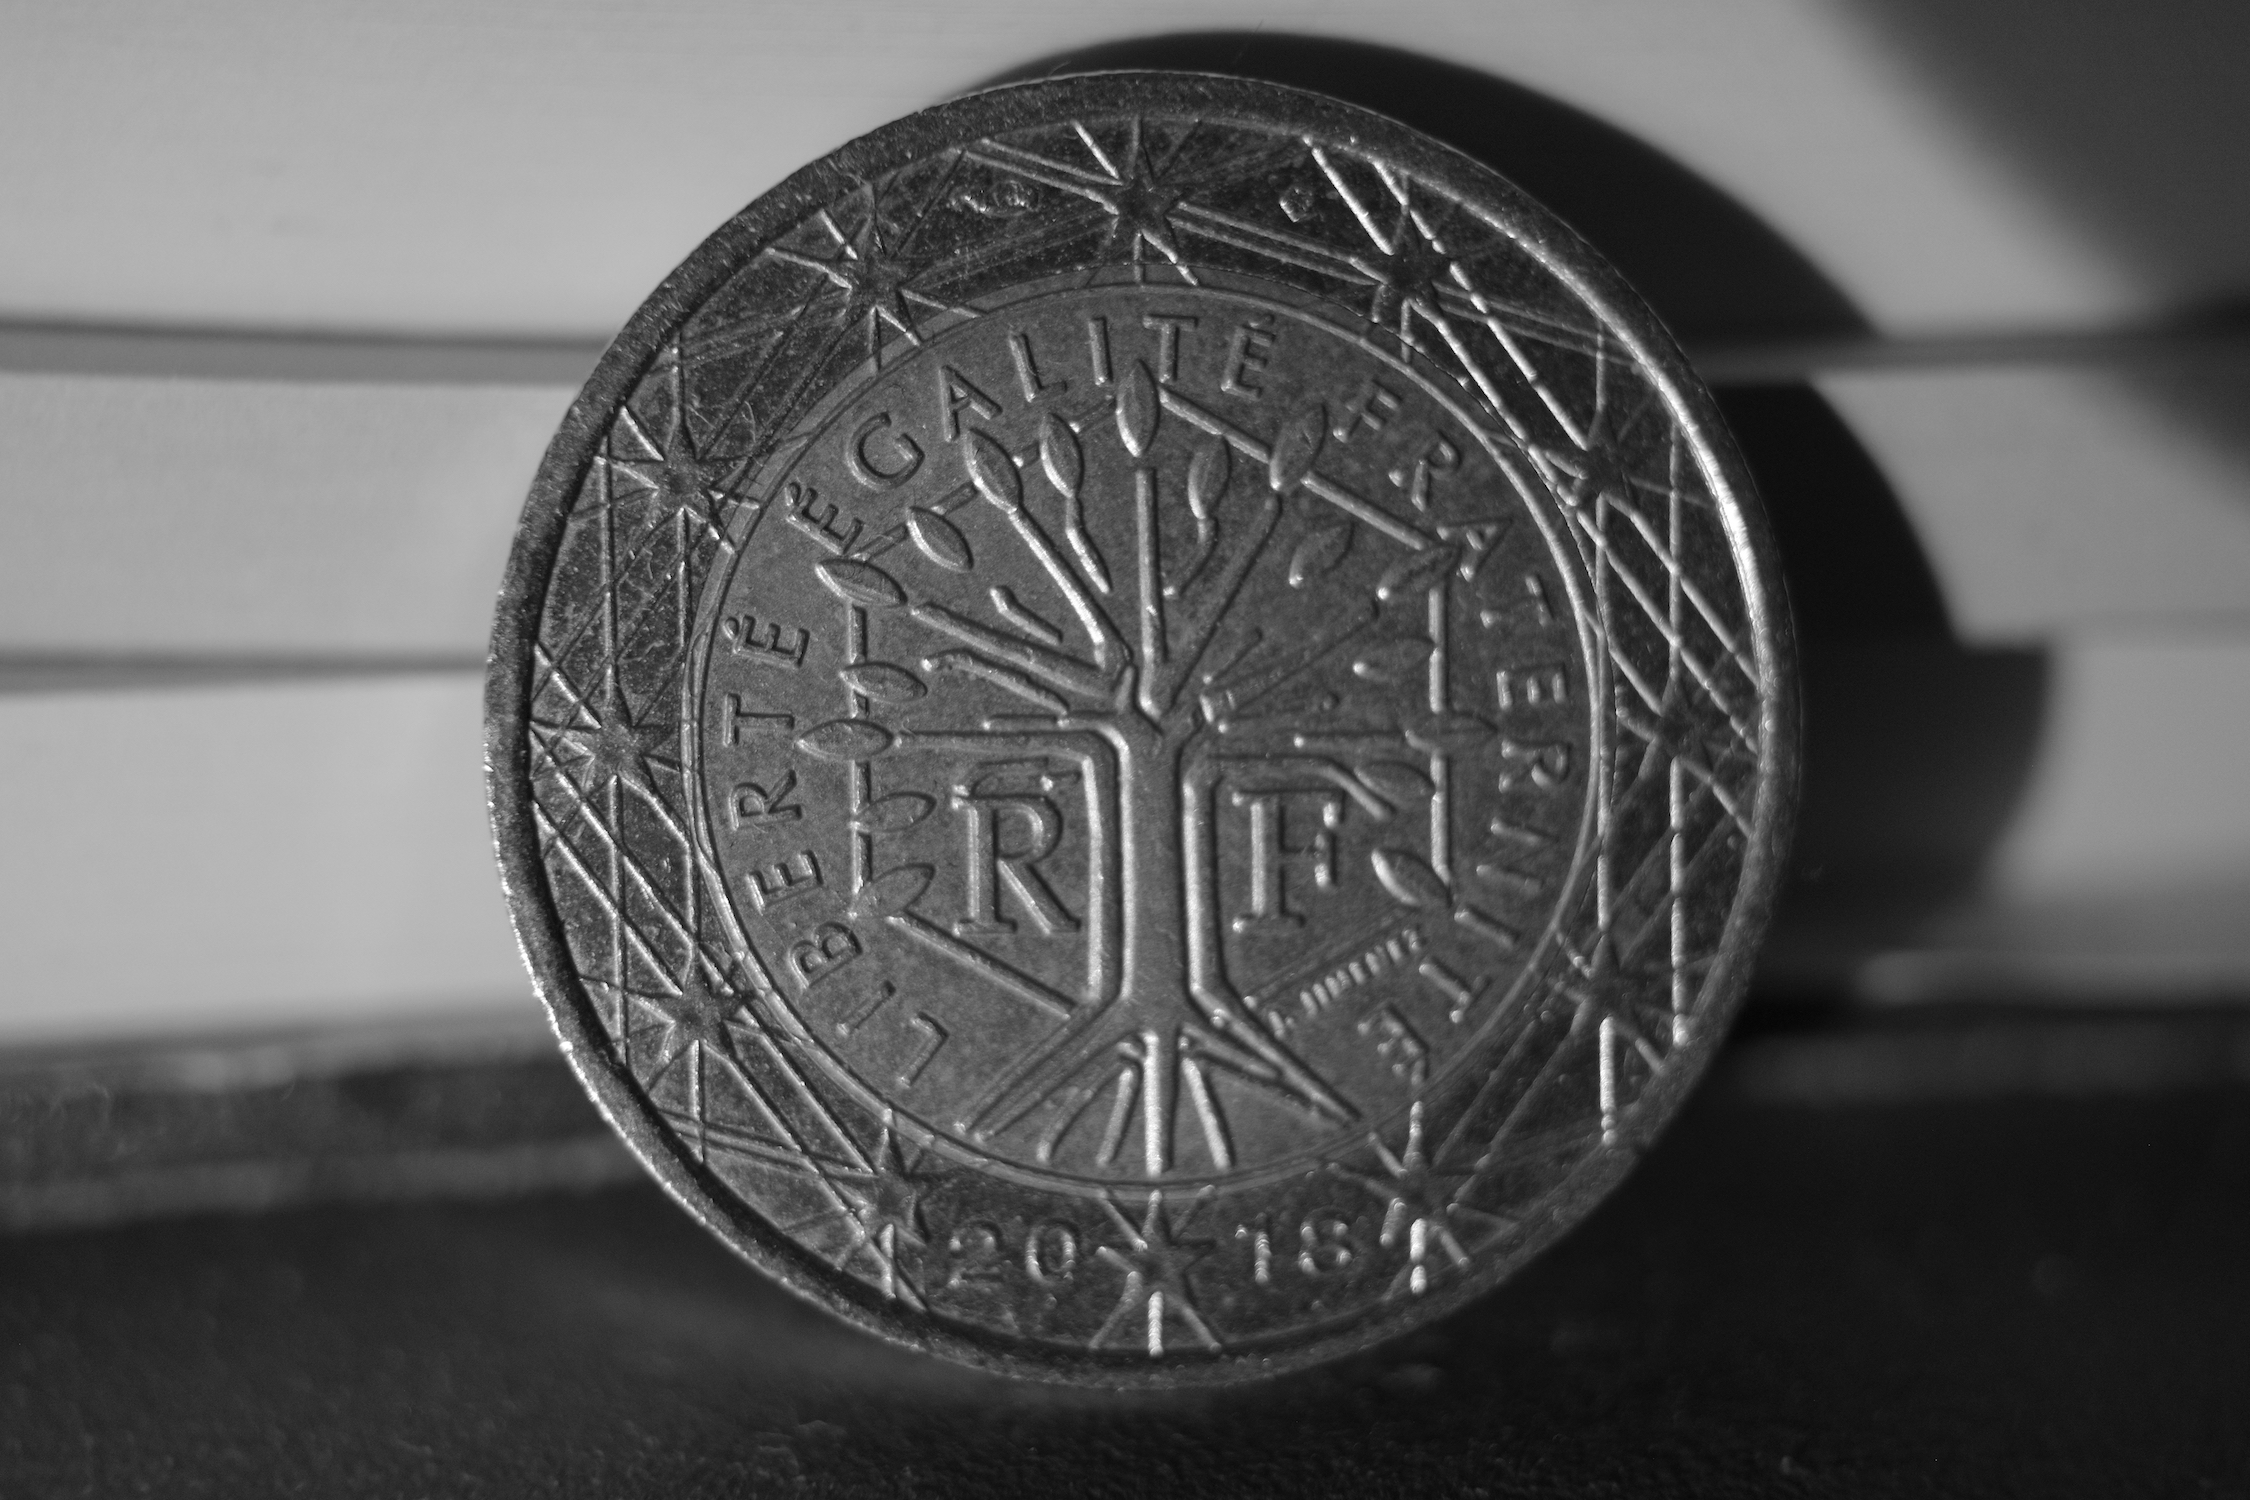 French 2 Euros coin close-up, black-and-white photo.